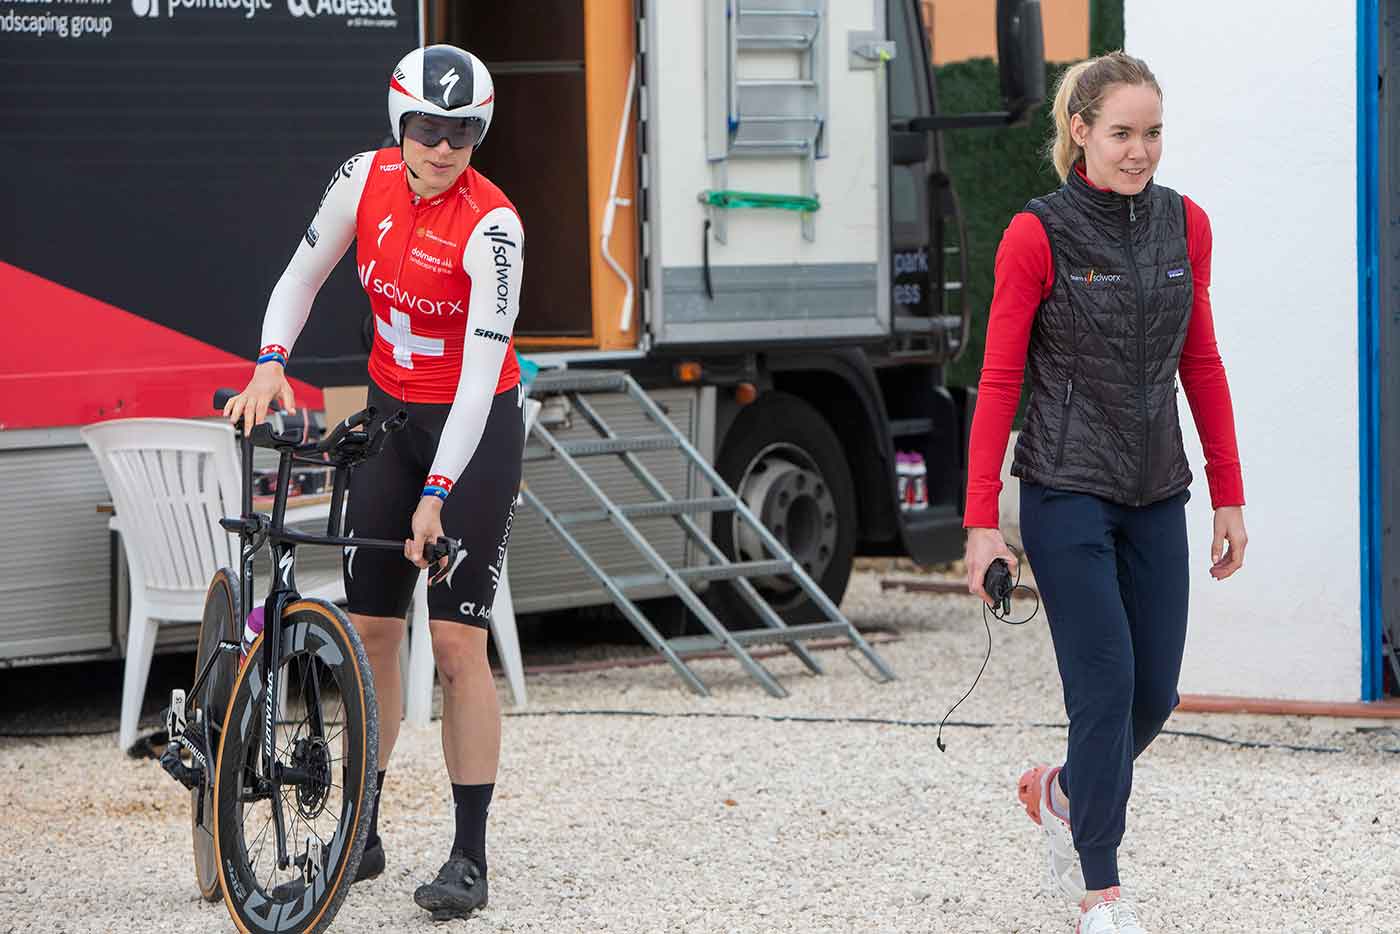 As a coach in women’s cycling, I learned to trust more on my intuition - Anna van der Breggen interview part 1 - Johan Cruyff Institute